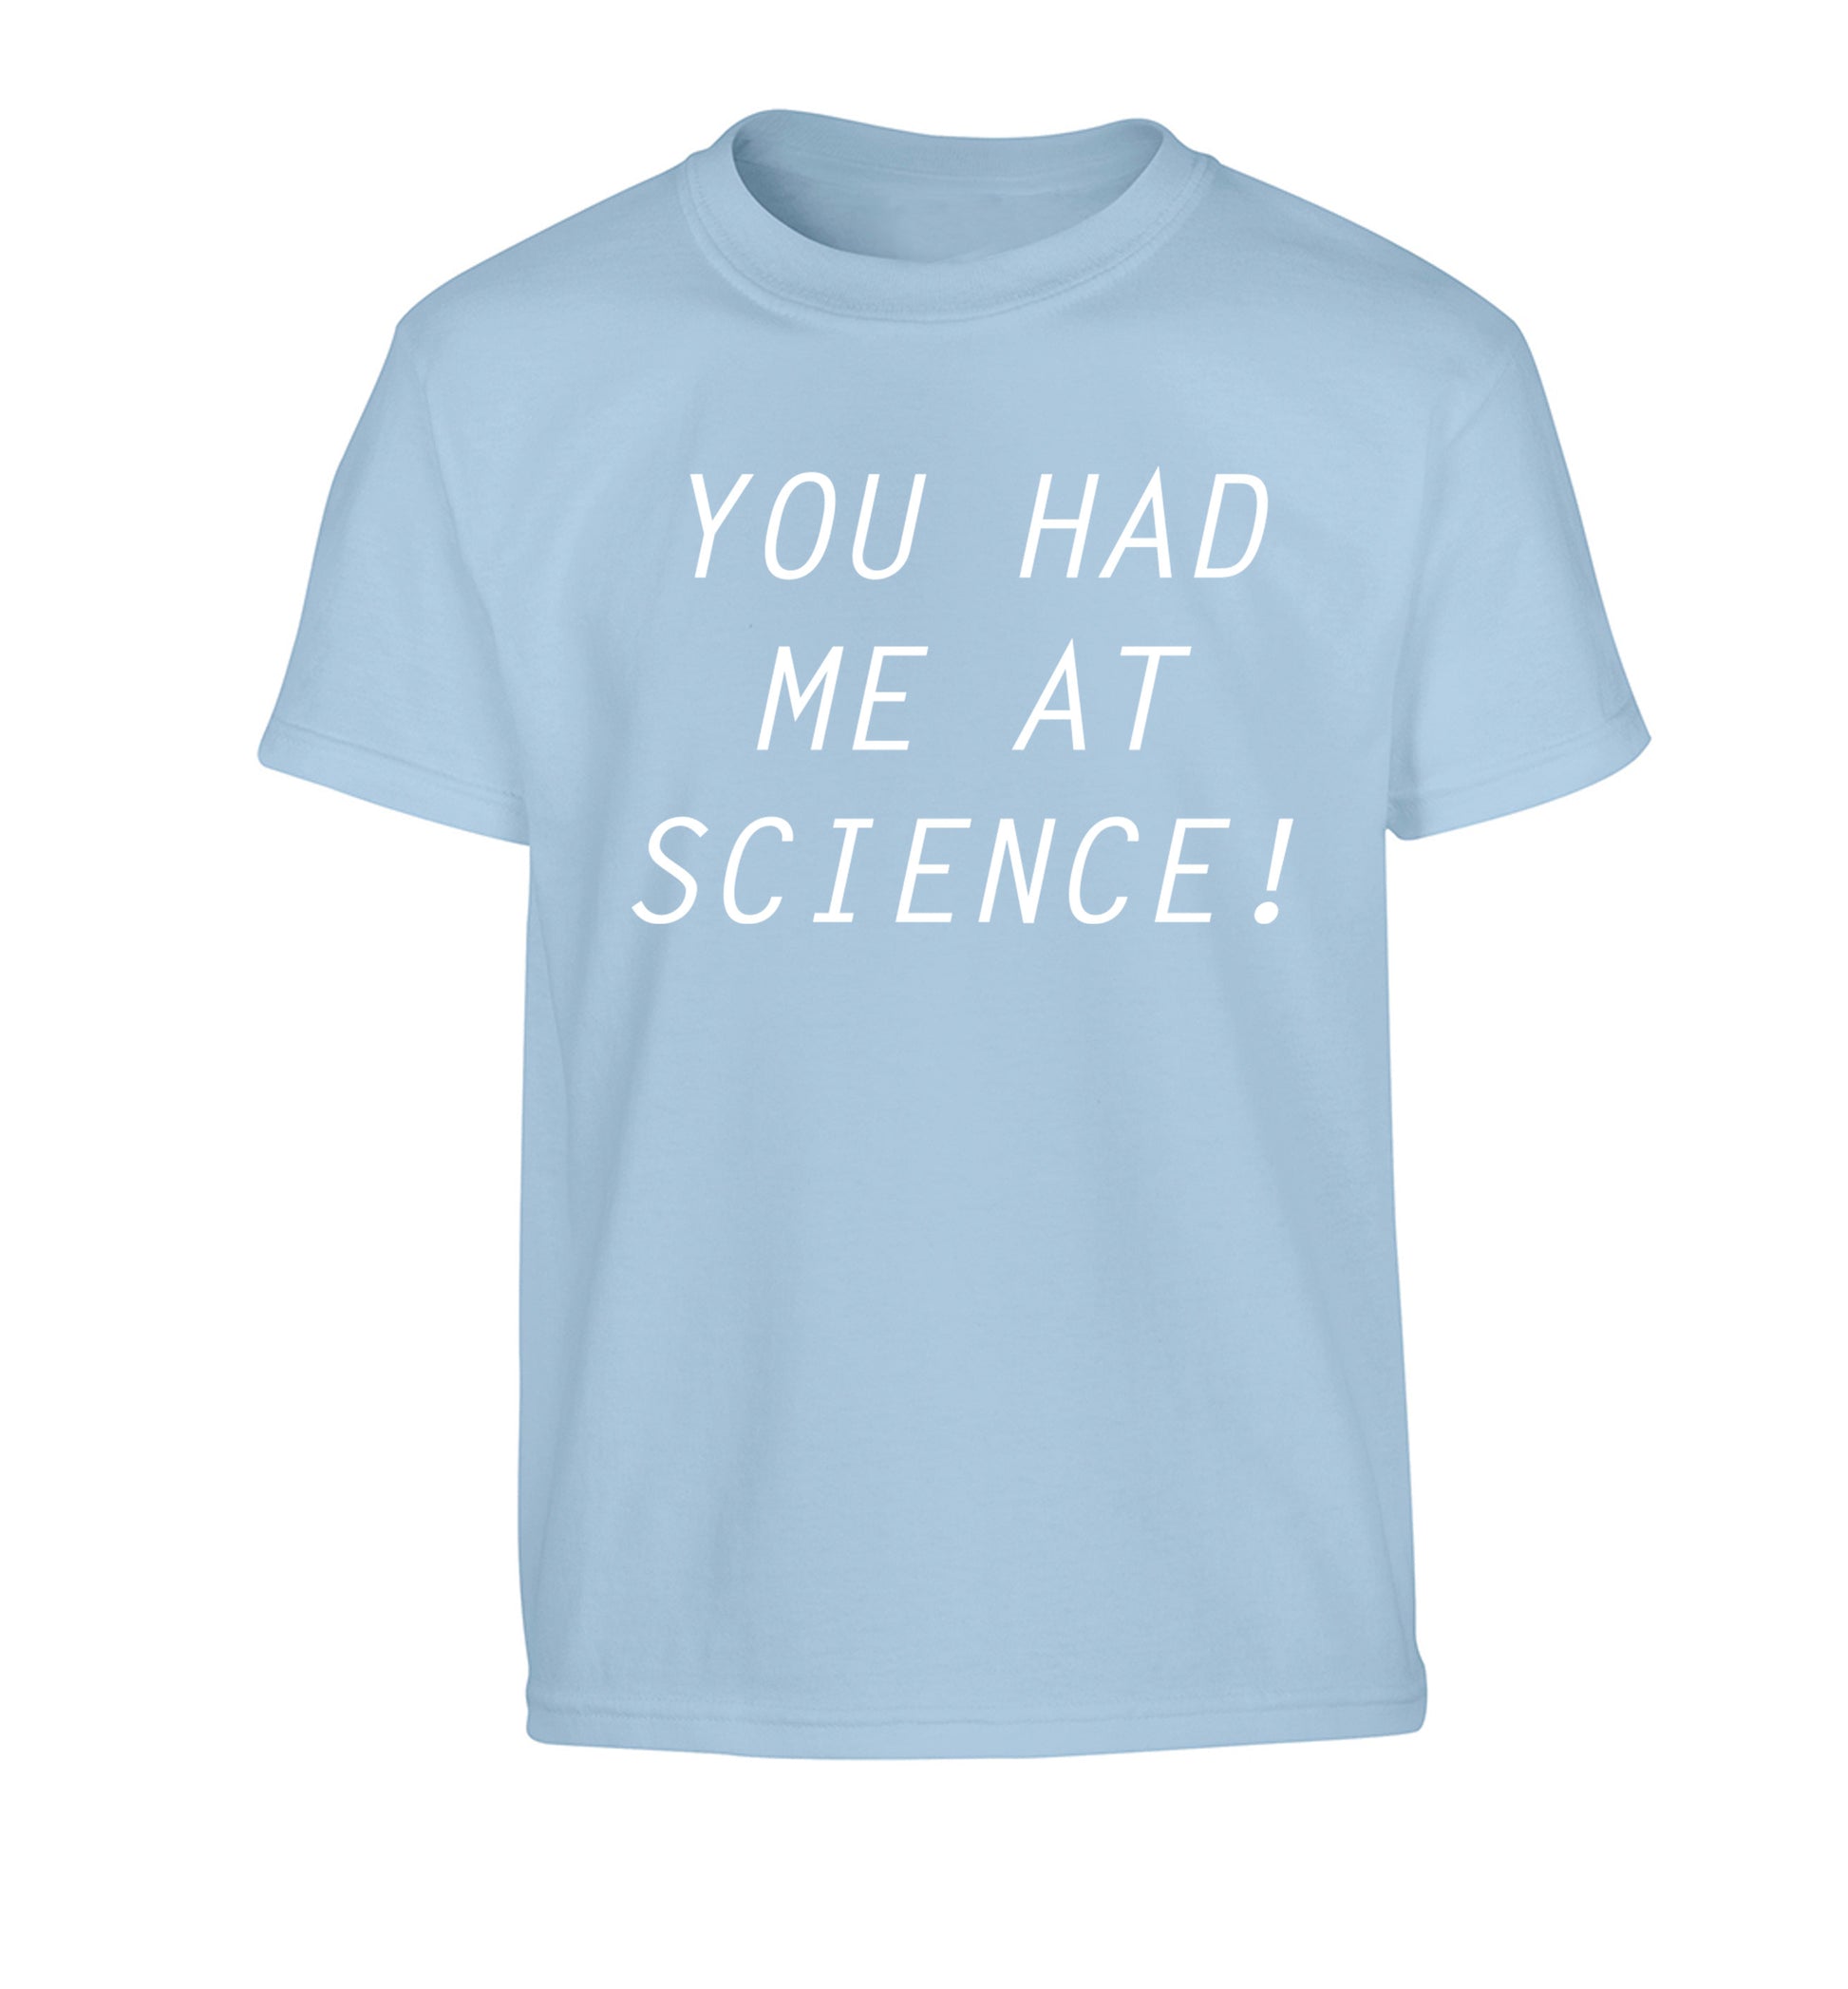 You had me at science Children's light blue Tshirt 12-14 Years